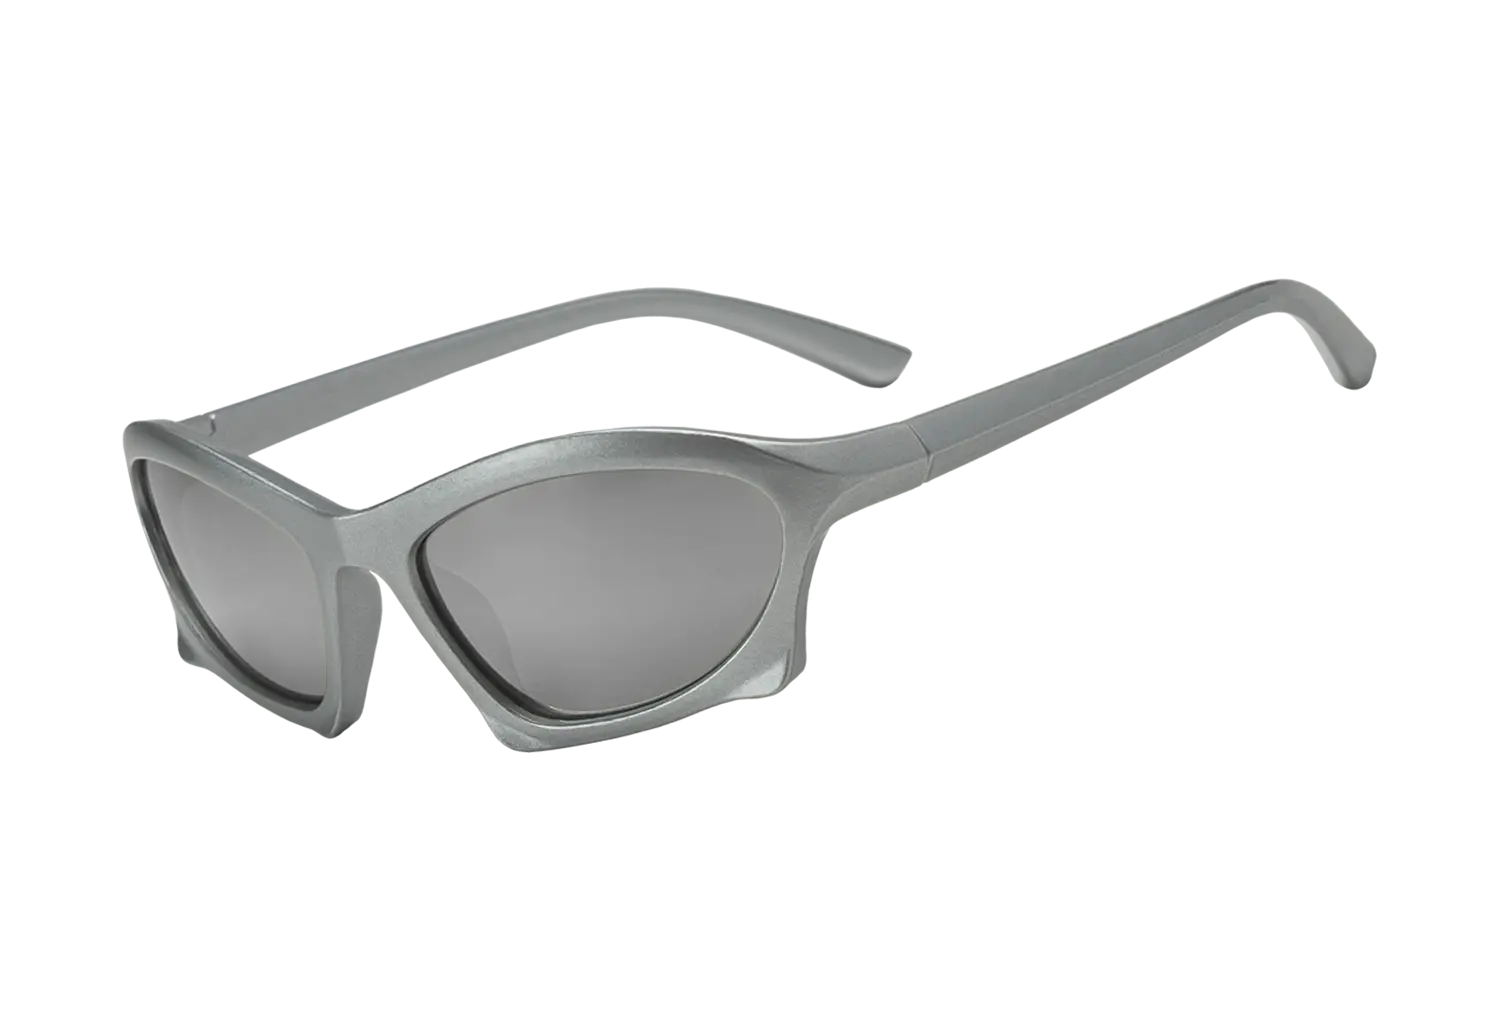 TheShadePrjct Chrome Retro-Futuristic Y2K Sunglasses In Silver And Chrome With 100% UV Protection And Free UK Shipping